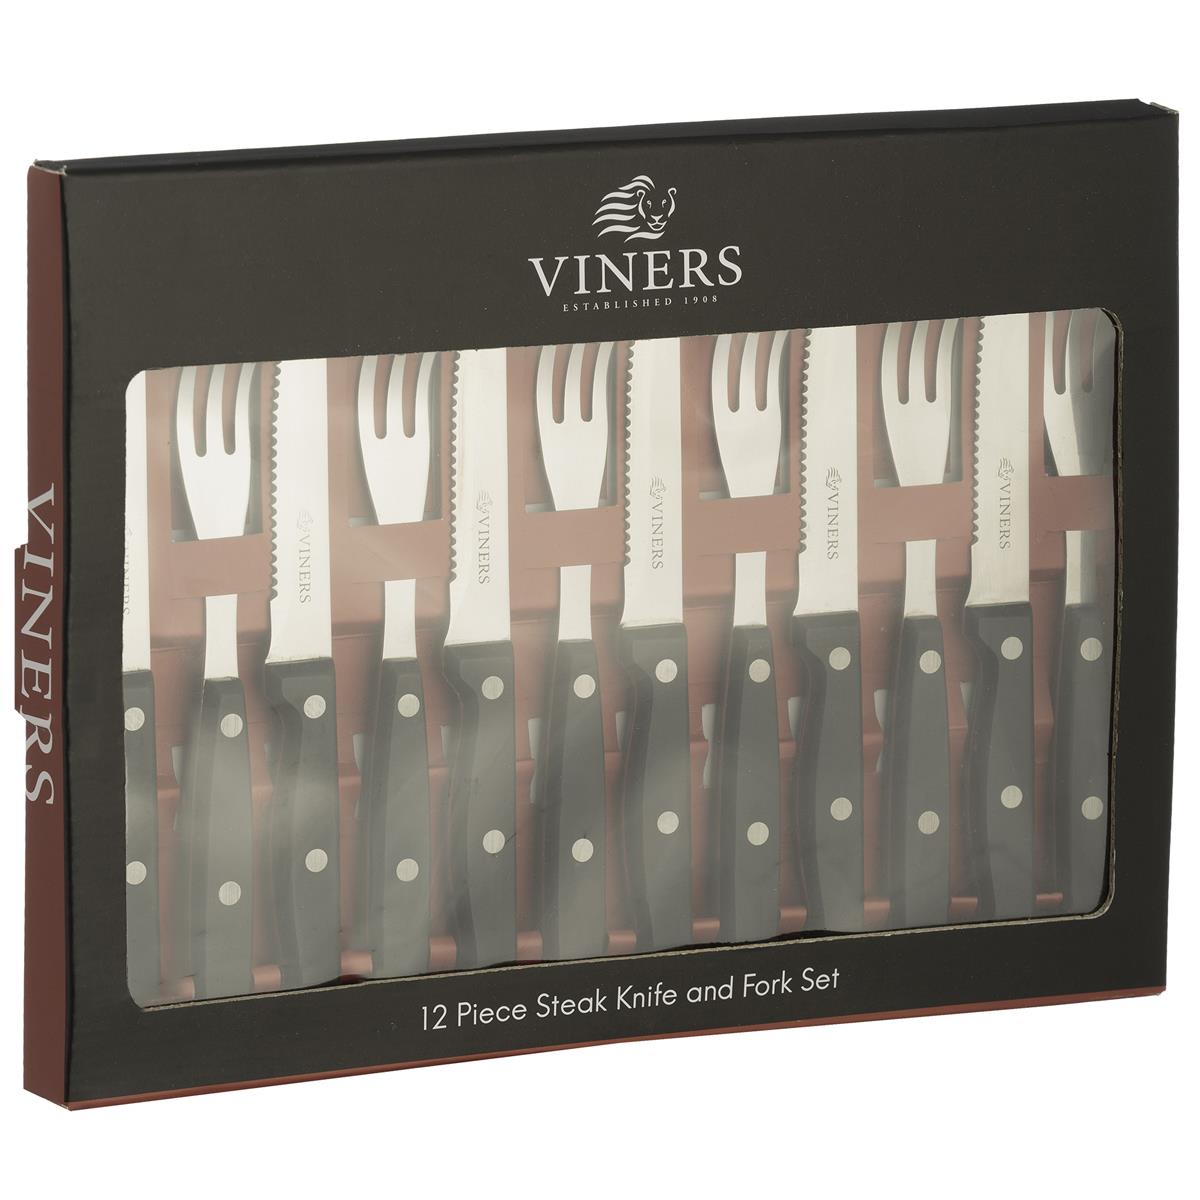 Does the Viners 12 Piece Steak Knife & Fork Set come with a warranty?